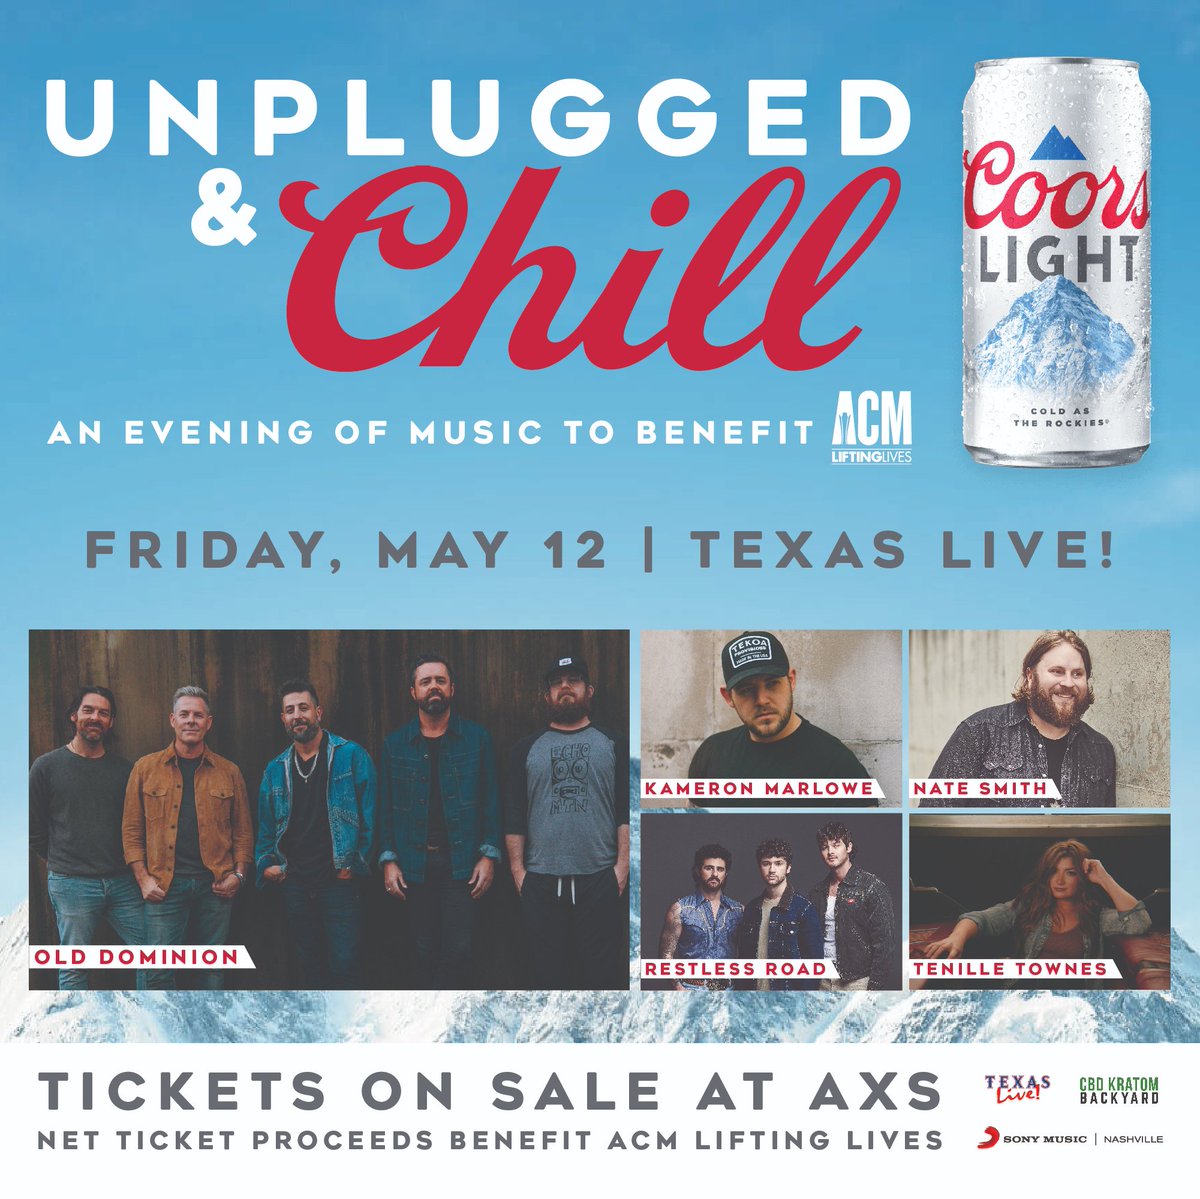 TEXAS! Can't wait to see you for a @coorslight Unplugged & Chill evening to benefit @acmliftinglives at @tx_live! Get tickets: axs.com/events/482345/…